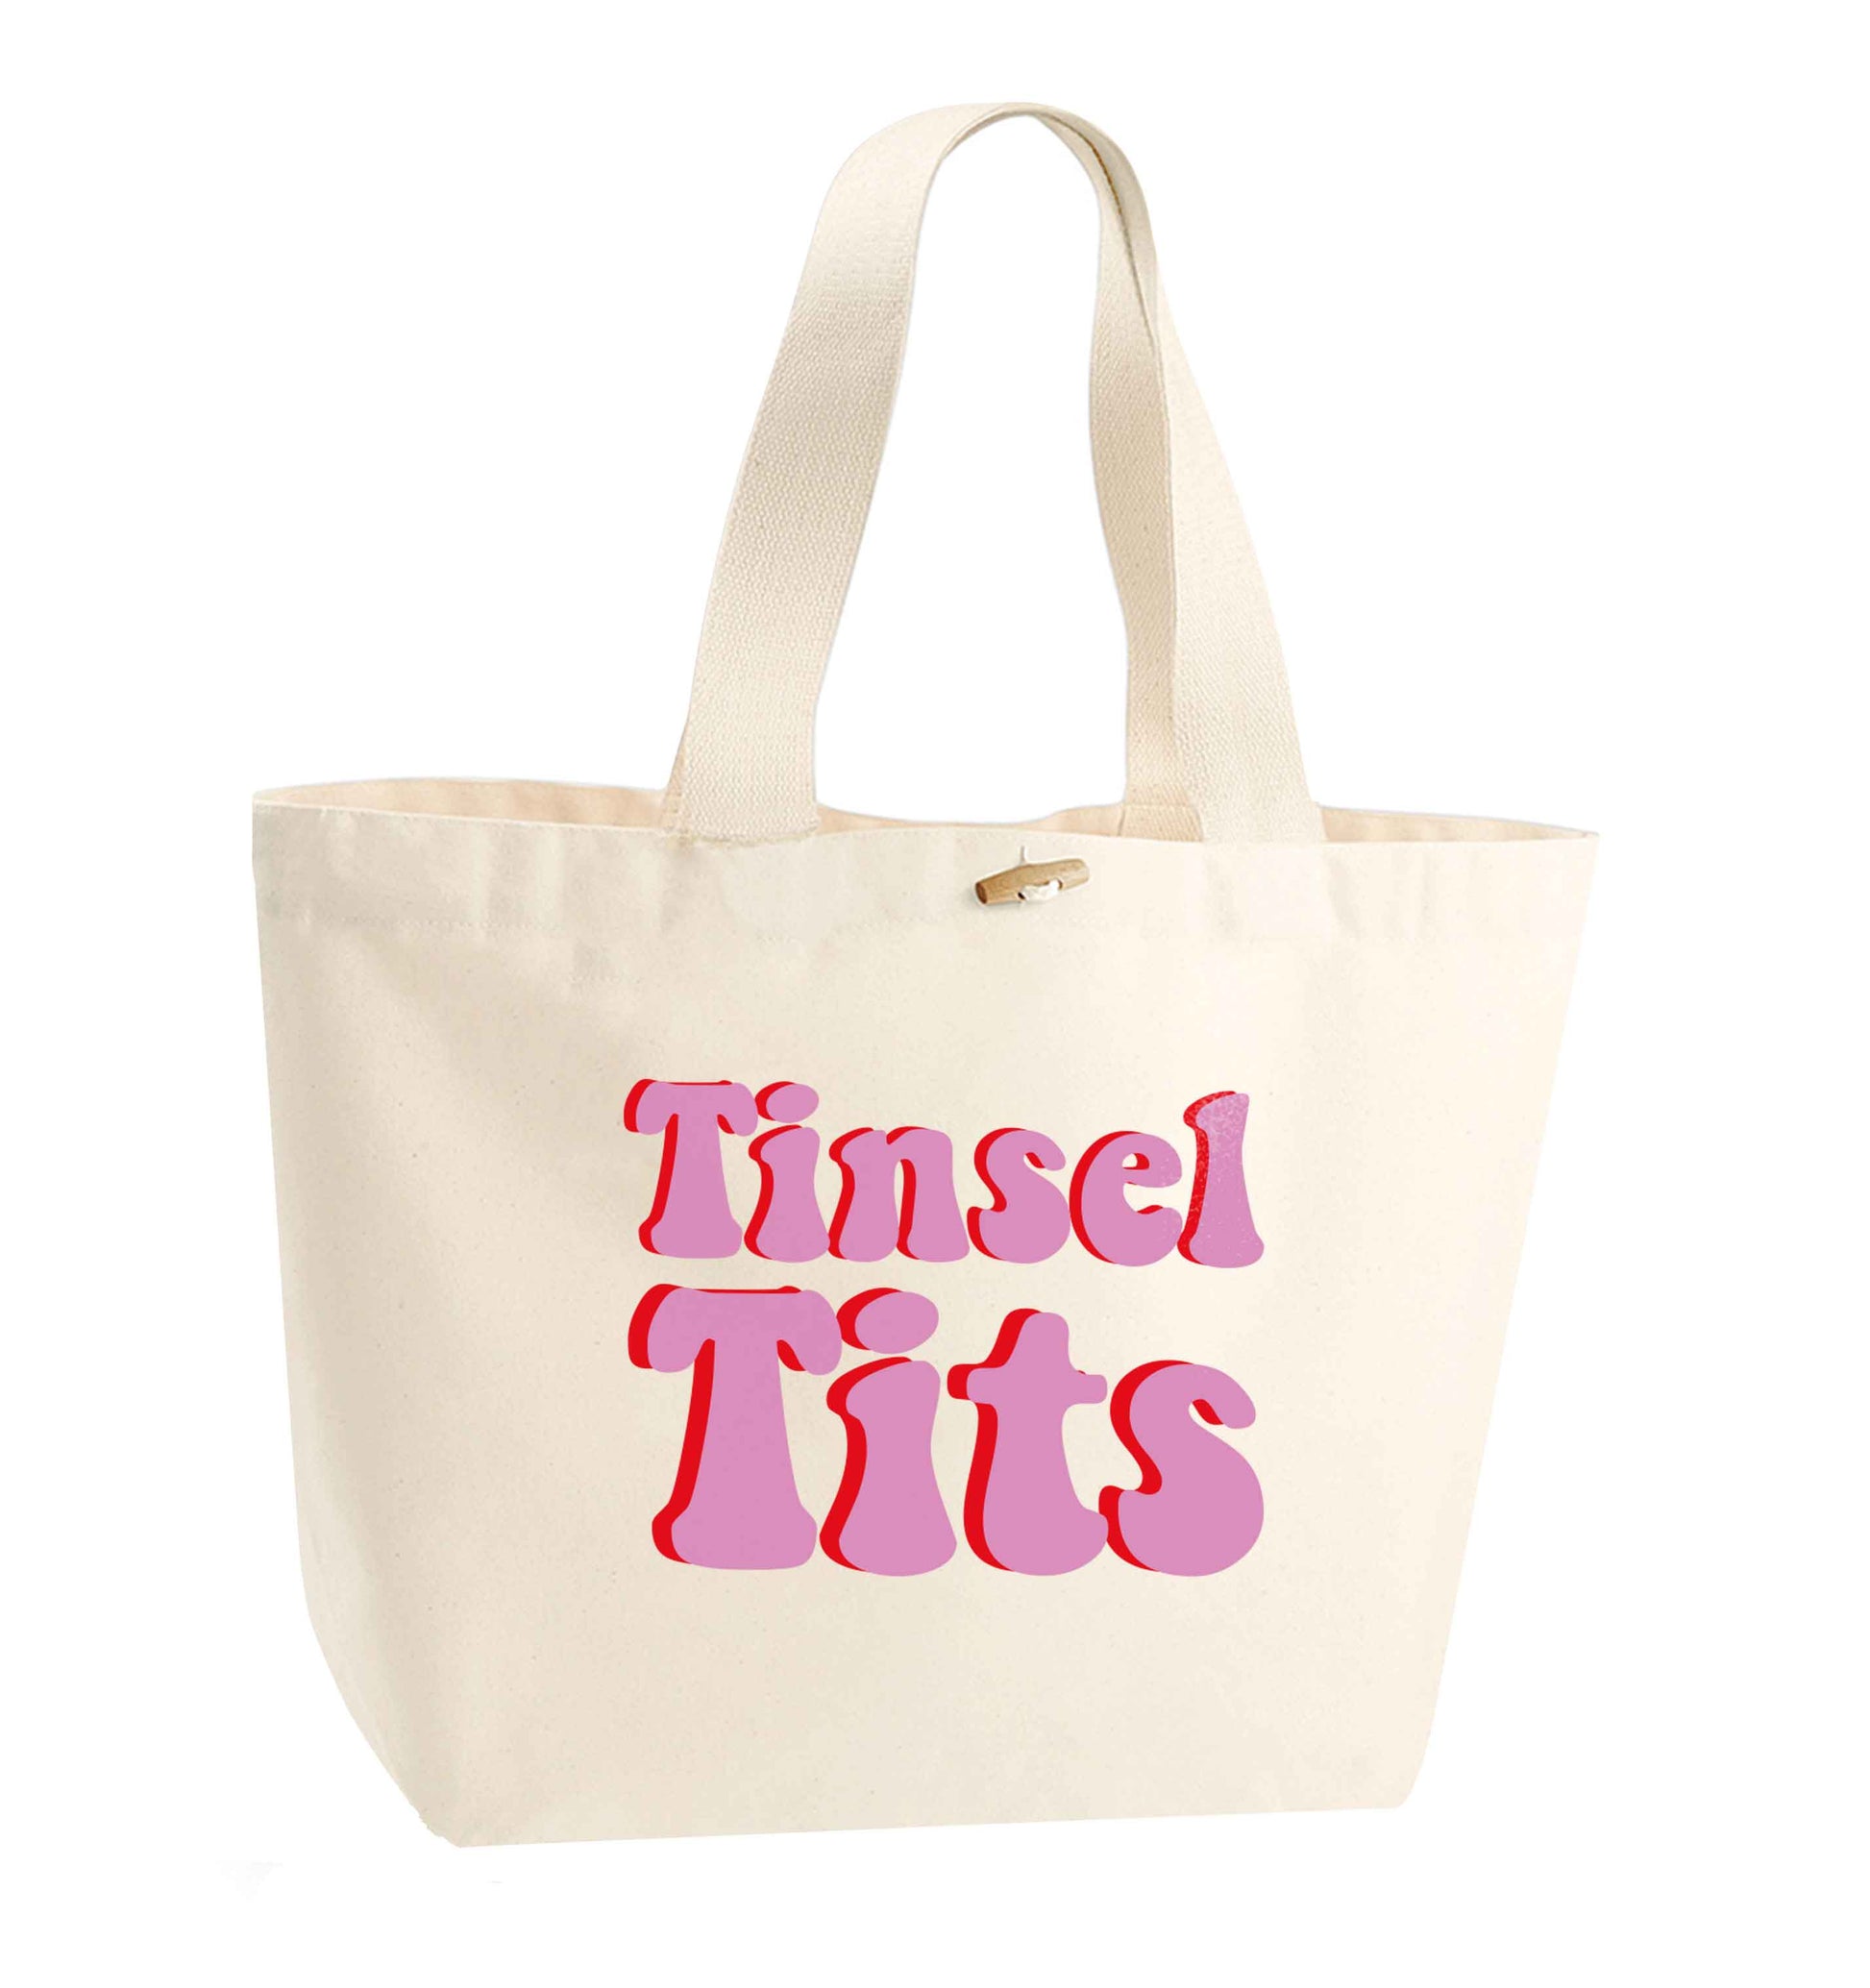 Tinsel tits organic cotton premium tote bag with wooden toggle in natural